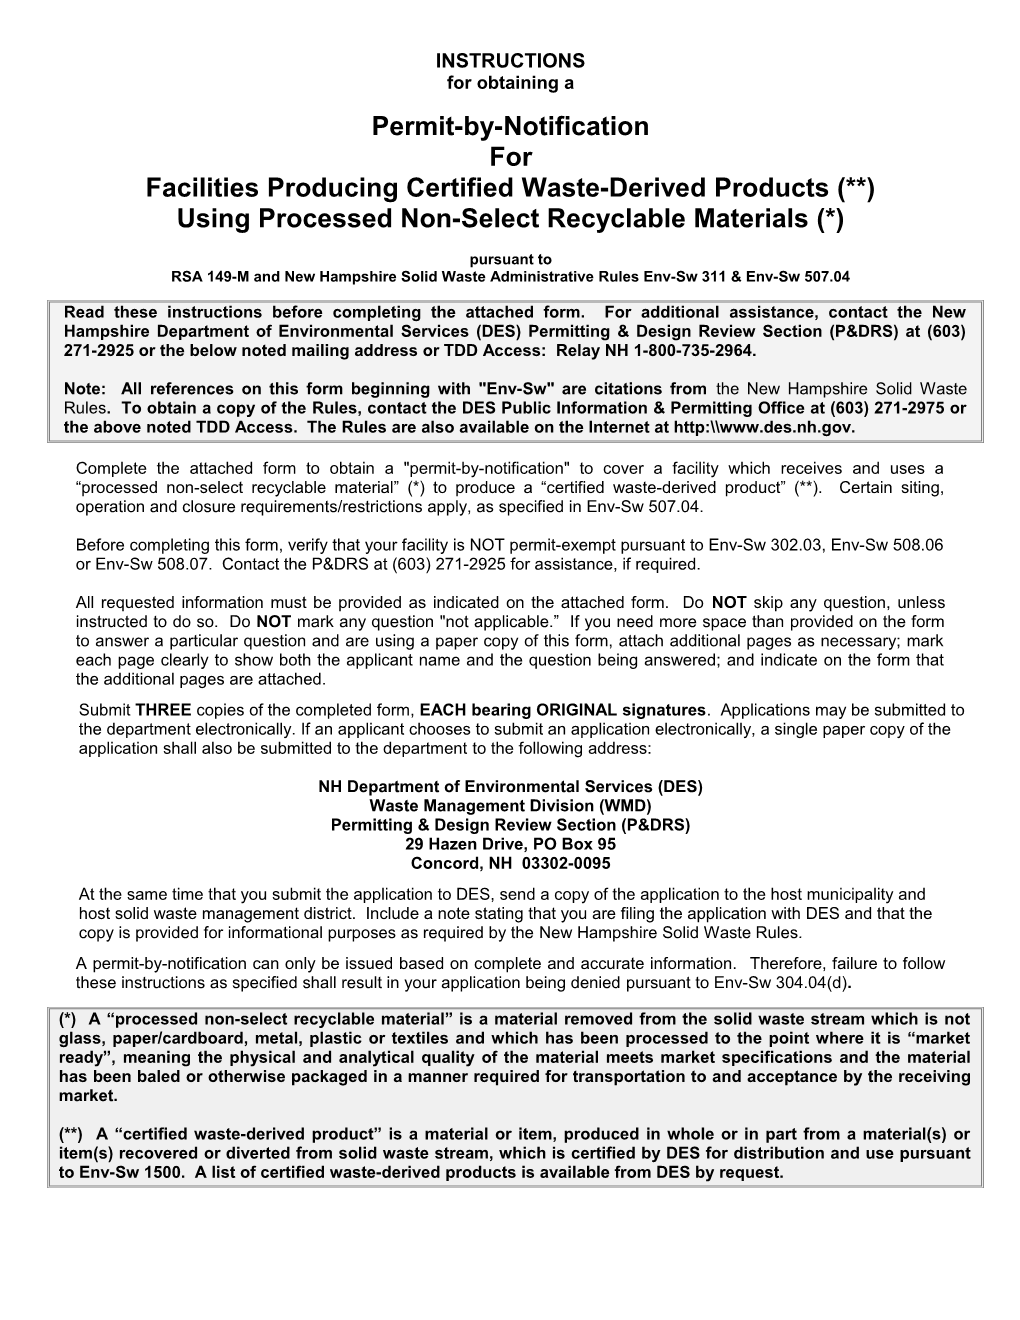 Facilities Producing Certified Waste-Derived Products ( )